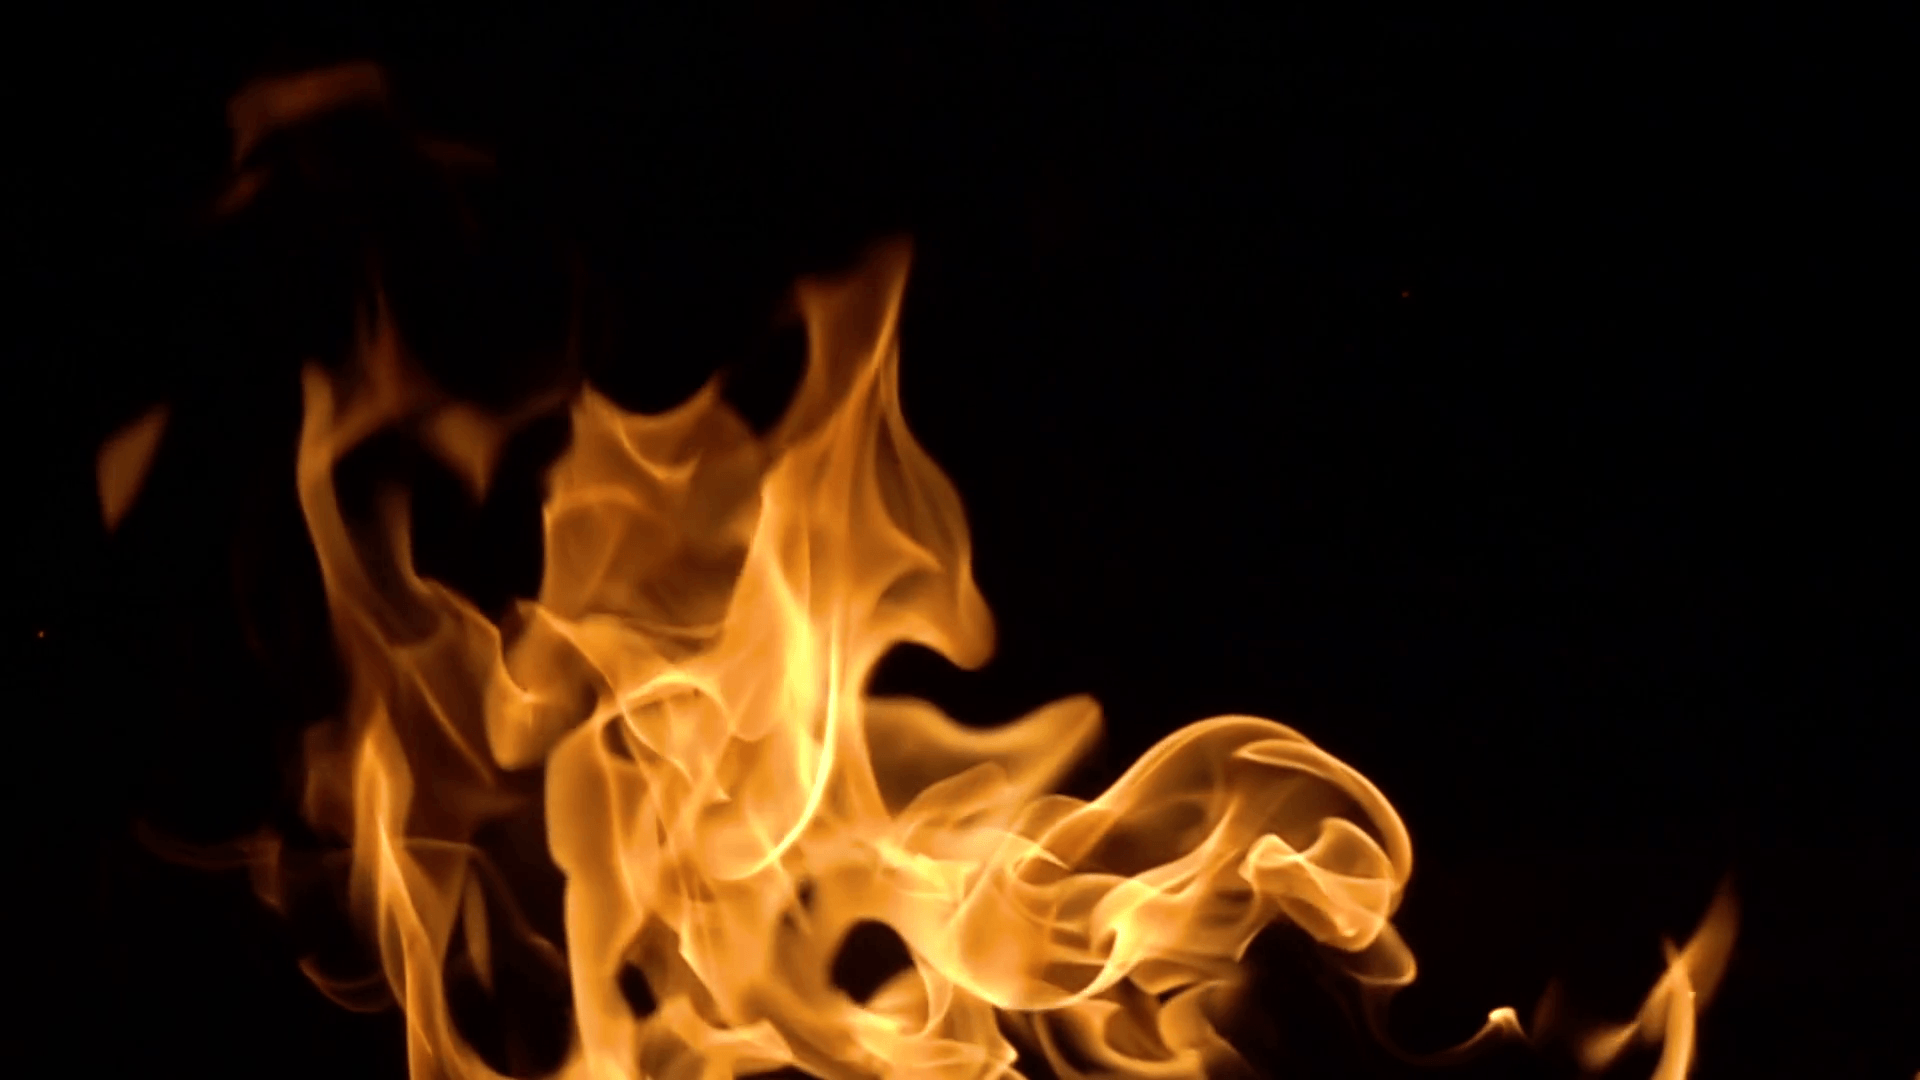 Flames of fire on black background in slow motion Stock Video